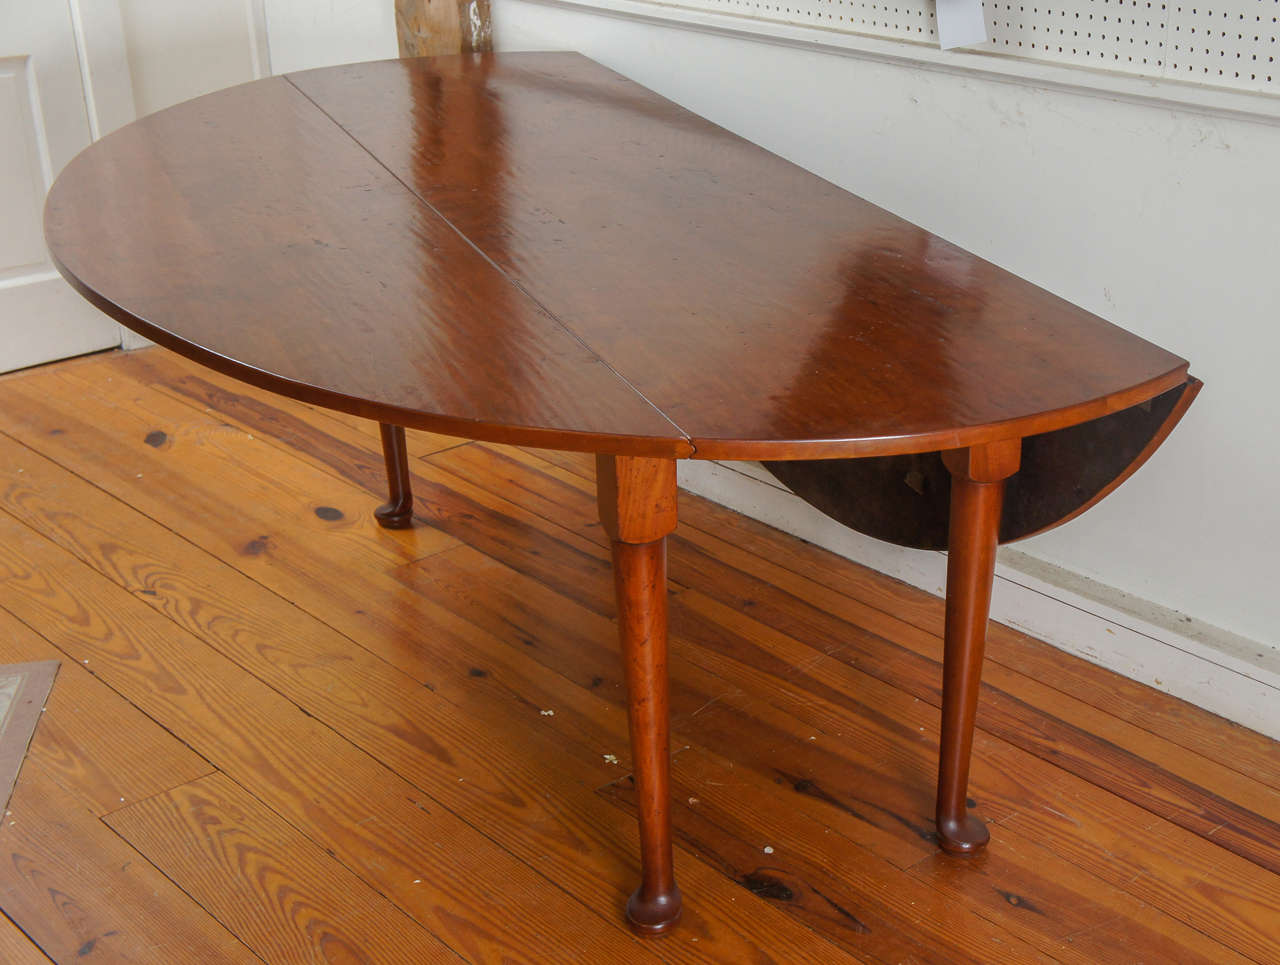 French Made to Order Drop-Leaf Cherry Table